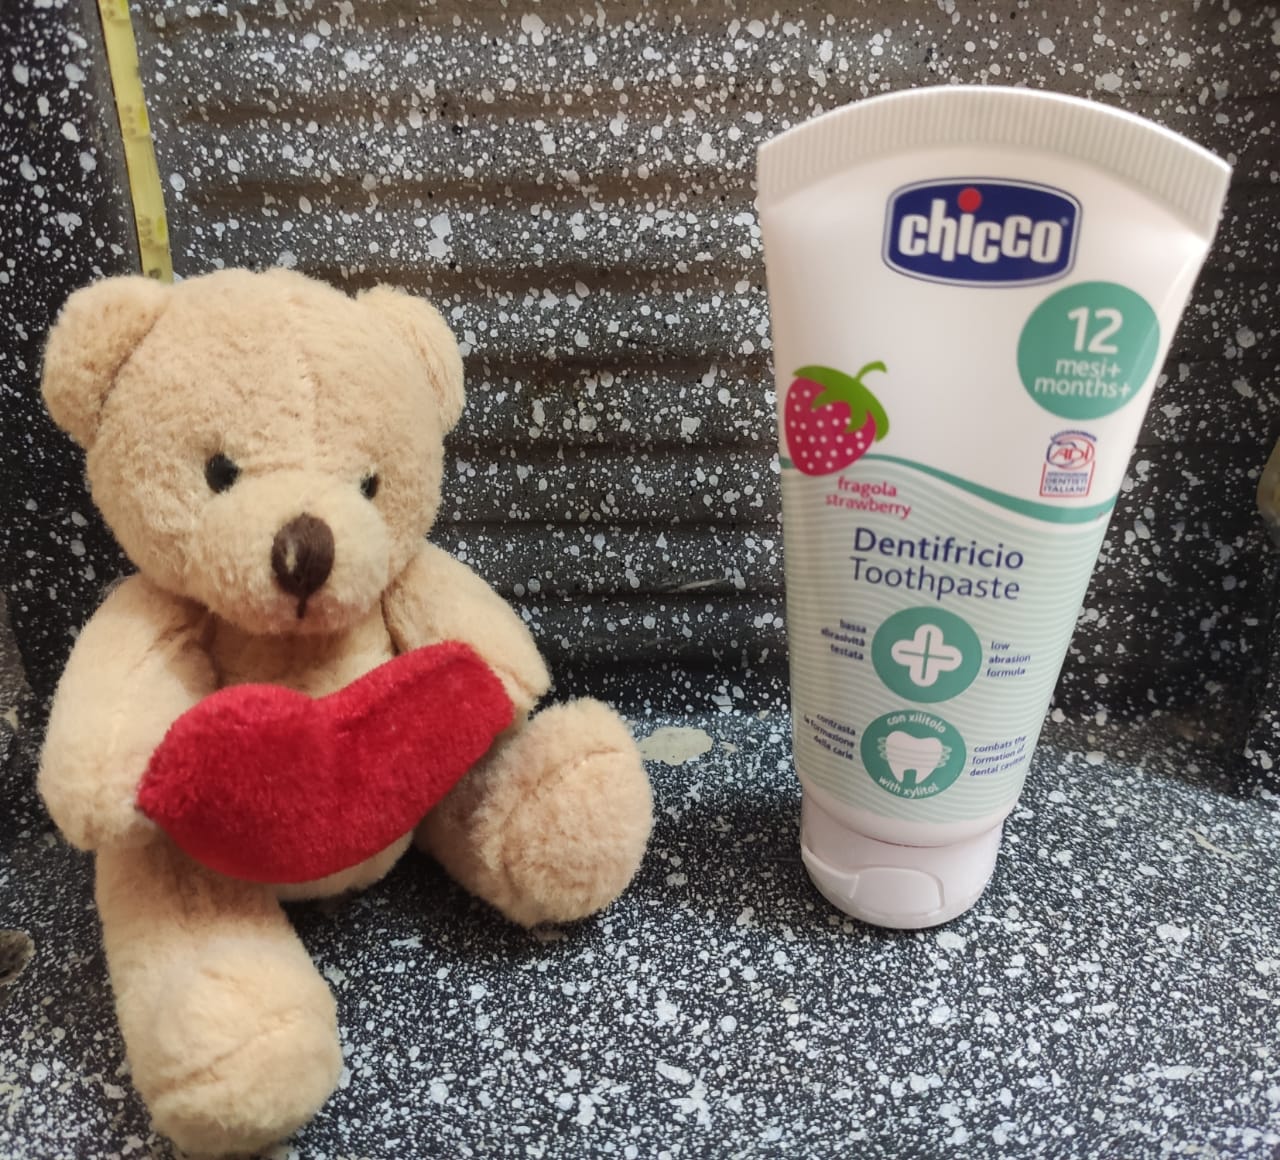 Chicco Dentifricio Baby Toothpaste (Strawberry)|Review